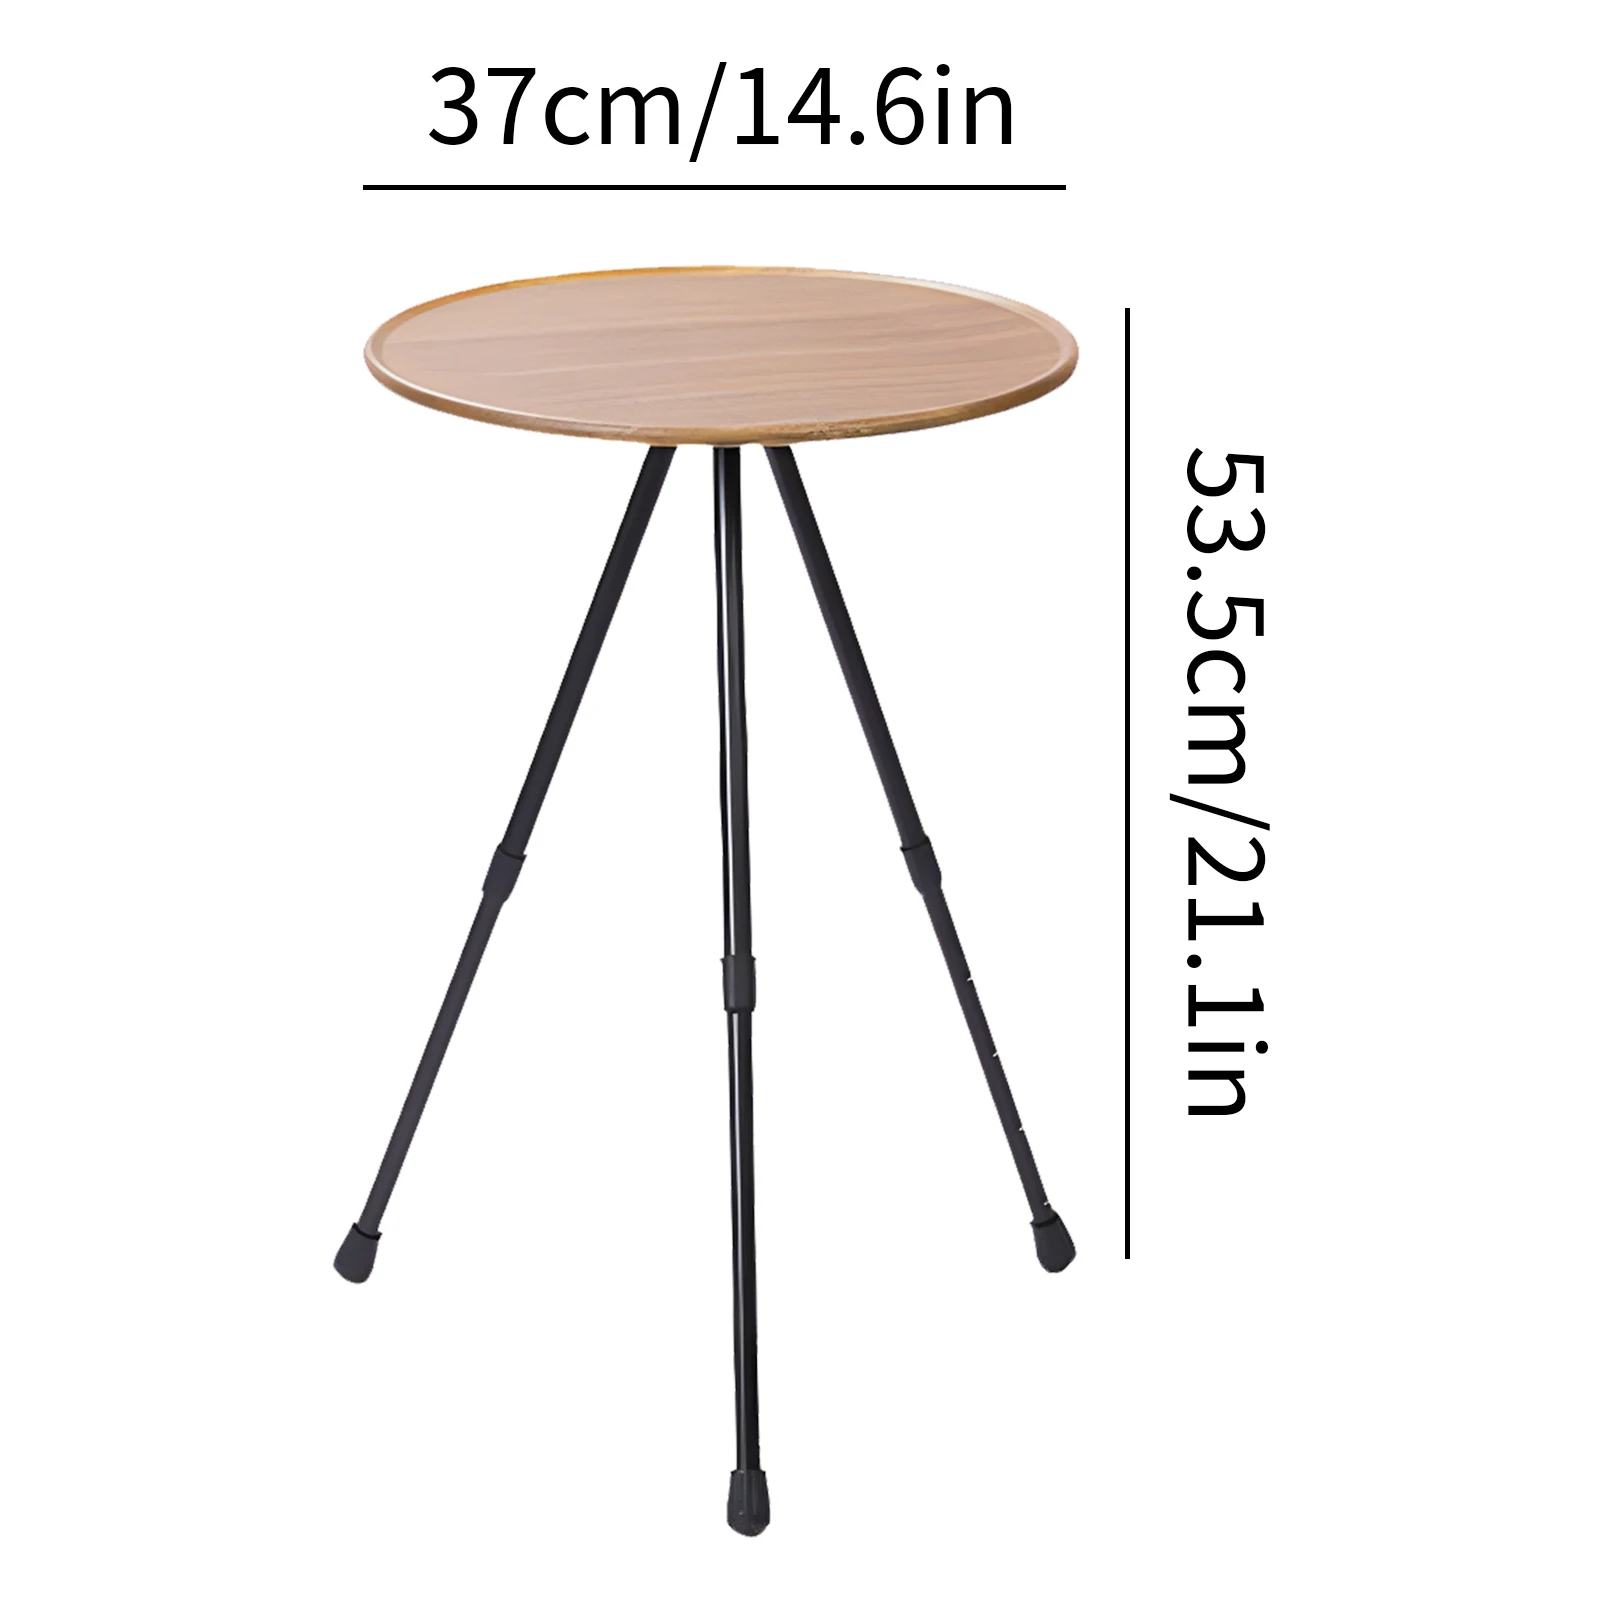 Portable Dining Table Round Folding Table Outdoor Camping Table Aluminum Alloy Picnic Table Computer Bed Table Camping Furniture images - 6